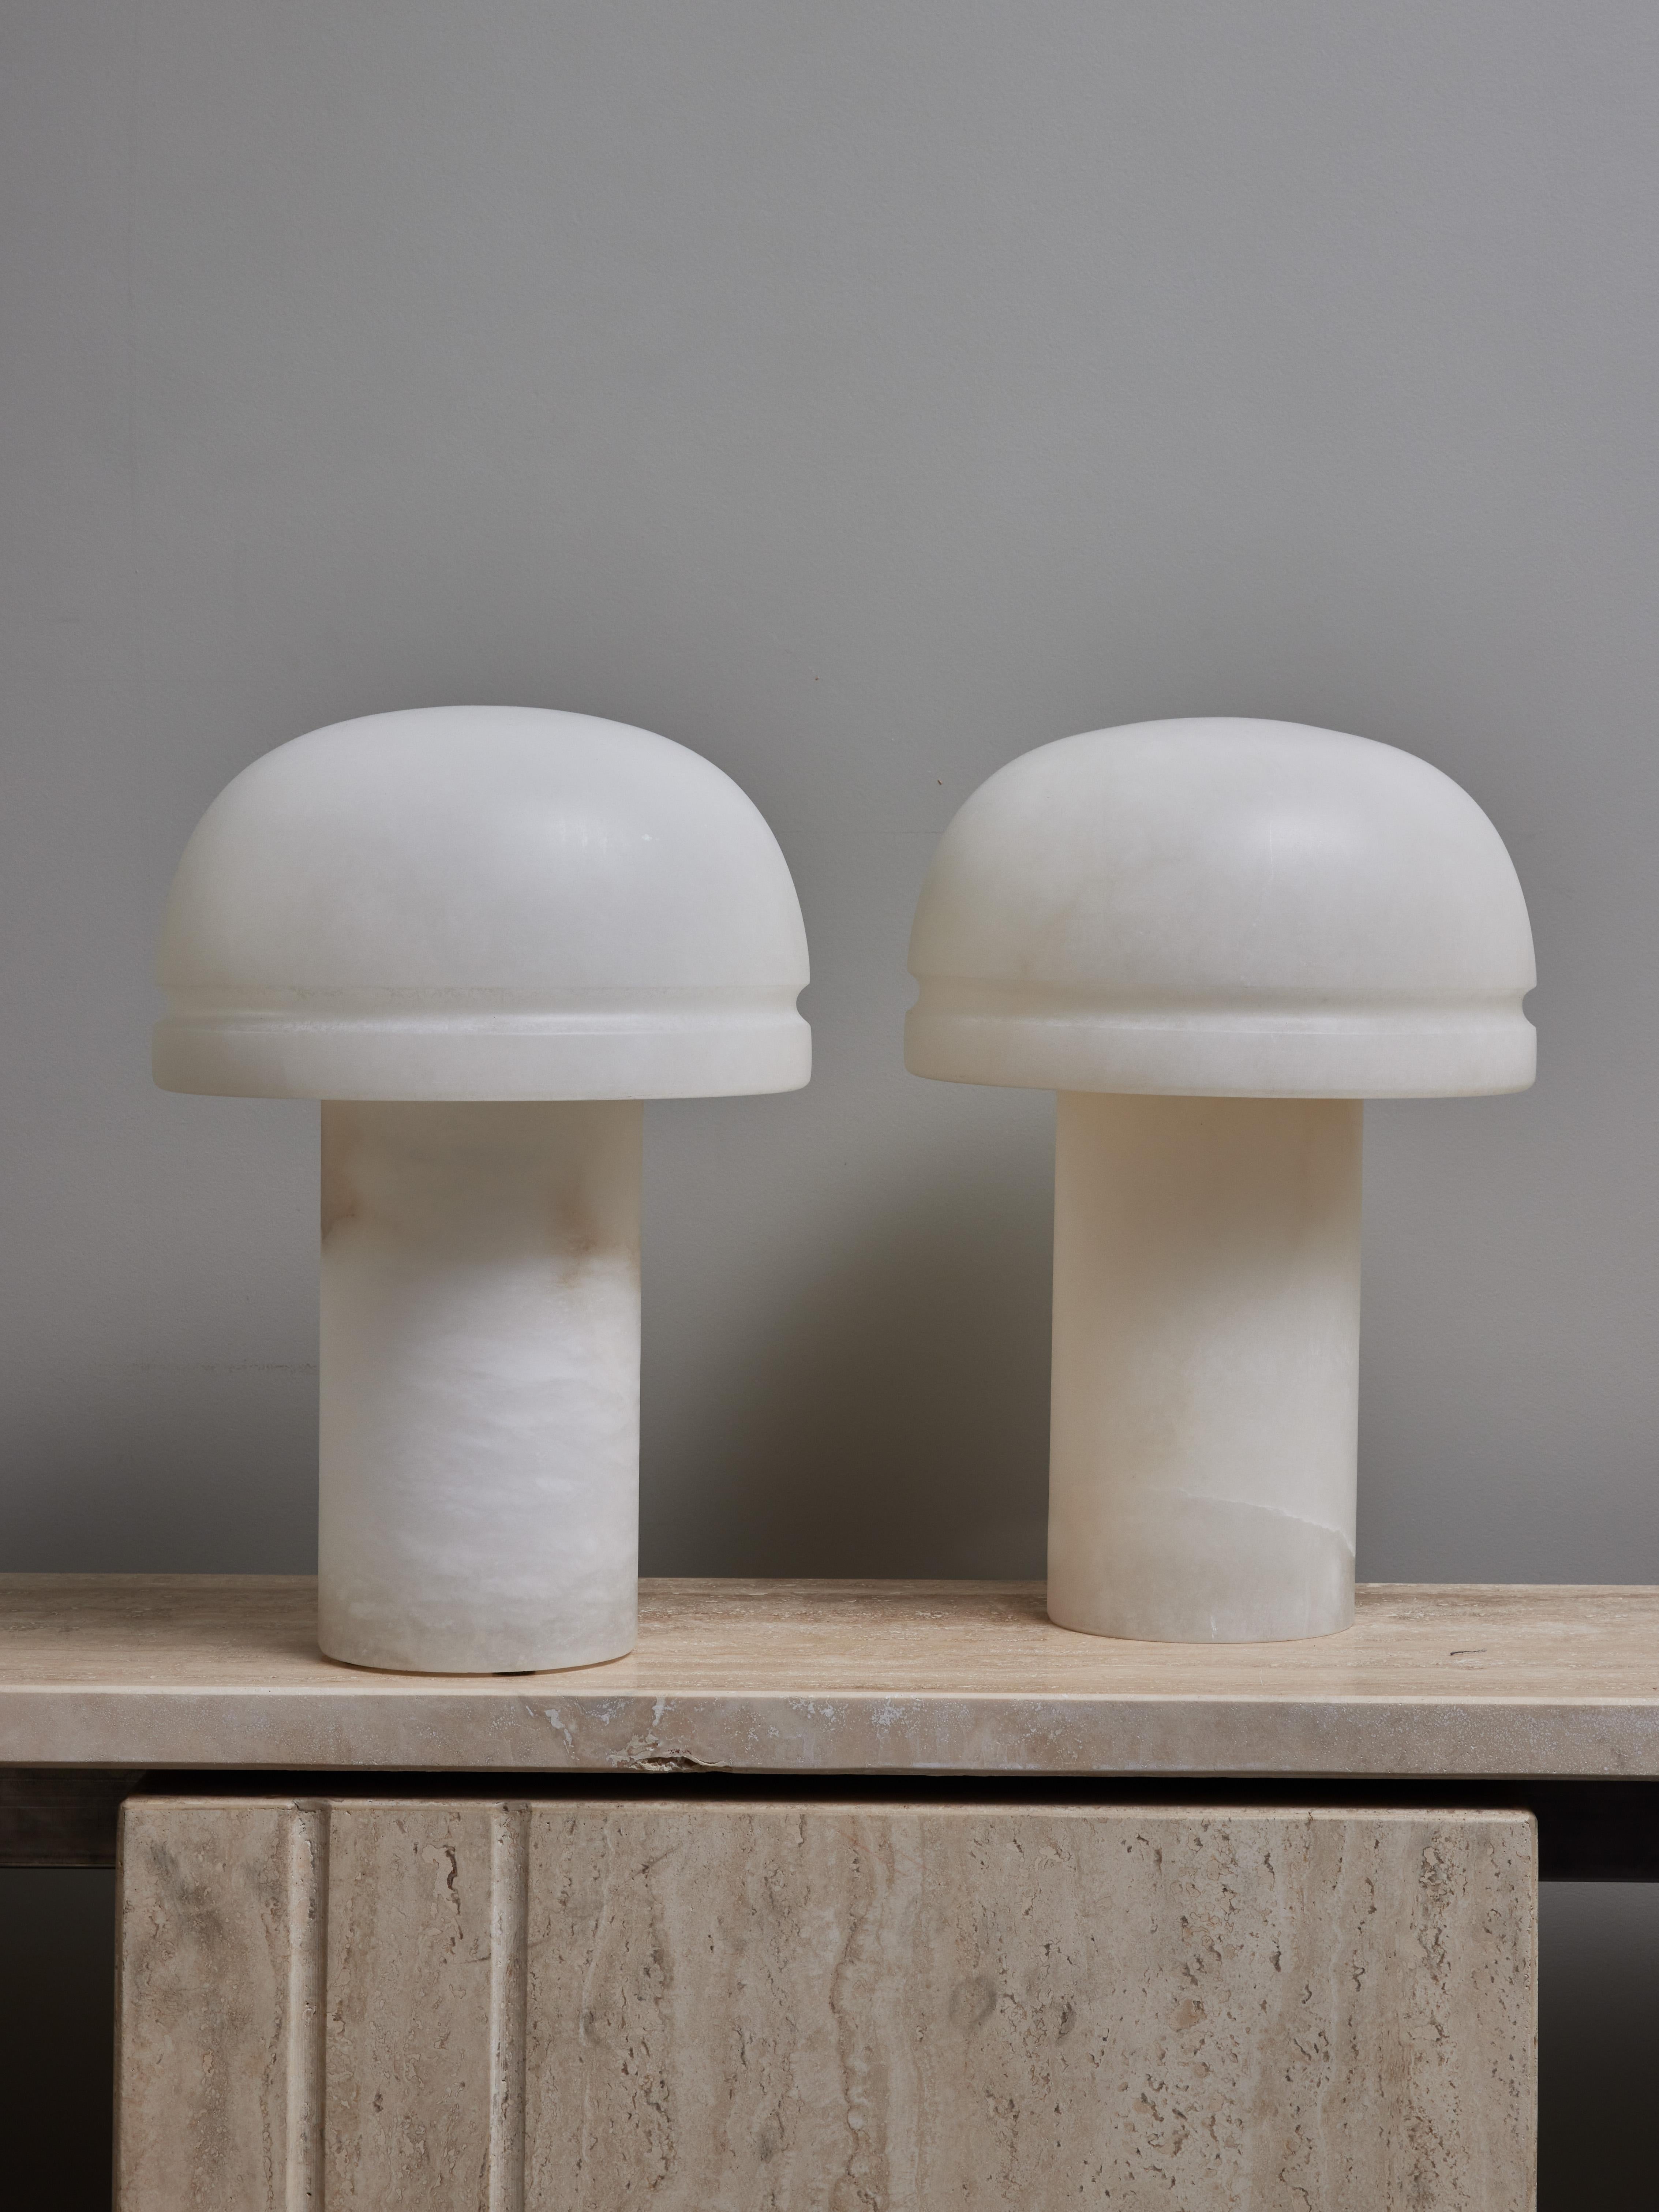 Pair of small table lamps made of two pieces of alabaster, a cylindrical base and a curved shade.